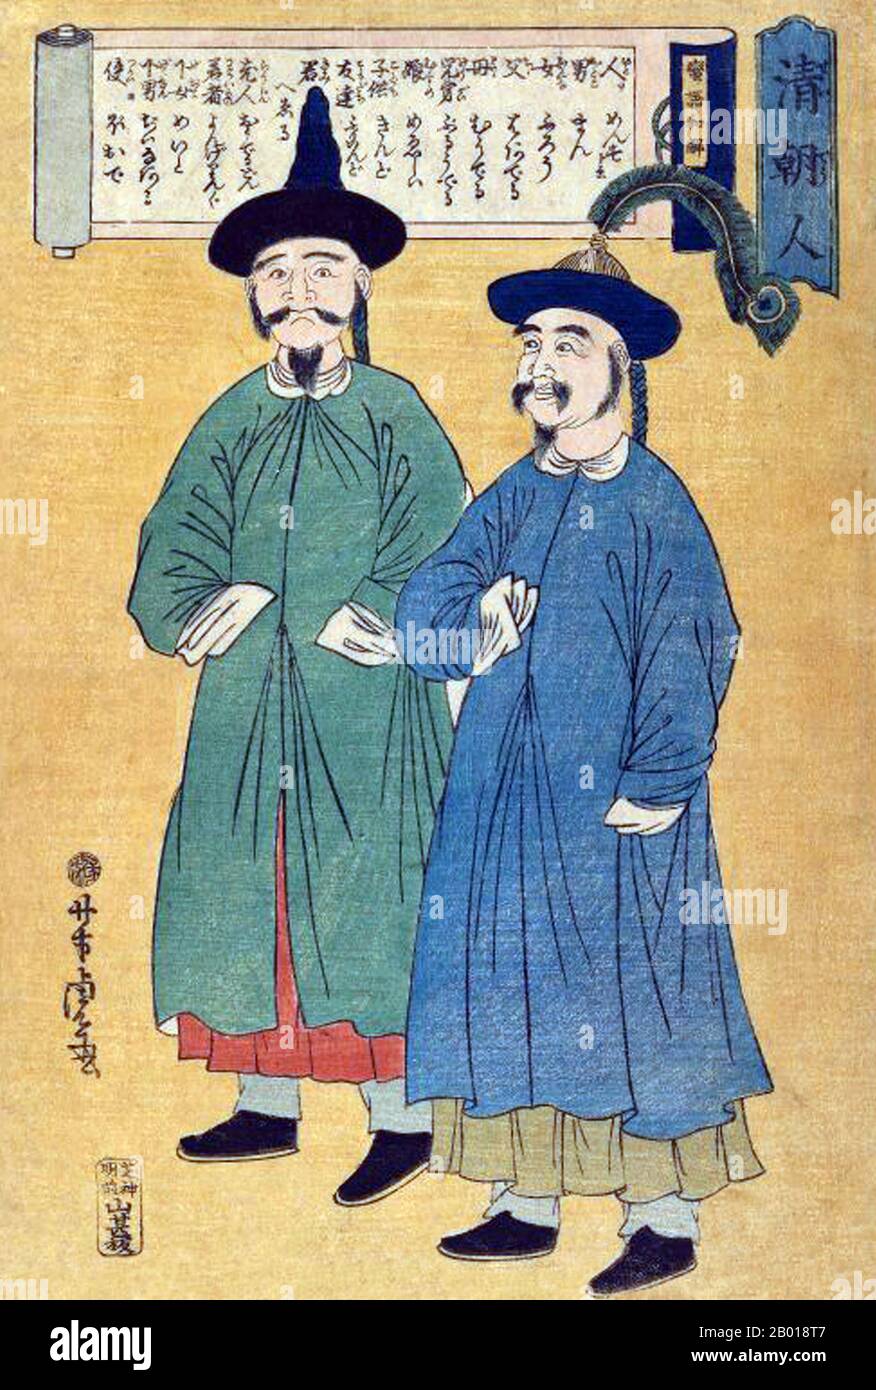 Japan: 'Two Chinese Men (Seicho-jin)'. Ukiyo-e woodblock print by Utagawa Yoshitora (1836-1880), 1863.  Utagawa Yoshitora was a designer of ukiyo-e woodblock prints and an illustrator of books and newspapers active from about 1850 to 1880. He was born in Edo (modern Tokyo), but neither his date of birth nor date of death is known. He was an important pupil of Utagawa Kuniyoshi who excelled in prints of warriors, kabuki actors, beautiful women, and foreigners (Yokohama-e). Stock Photo